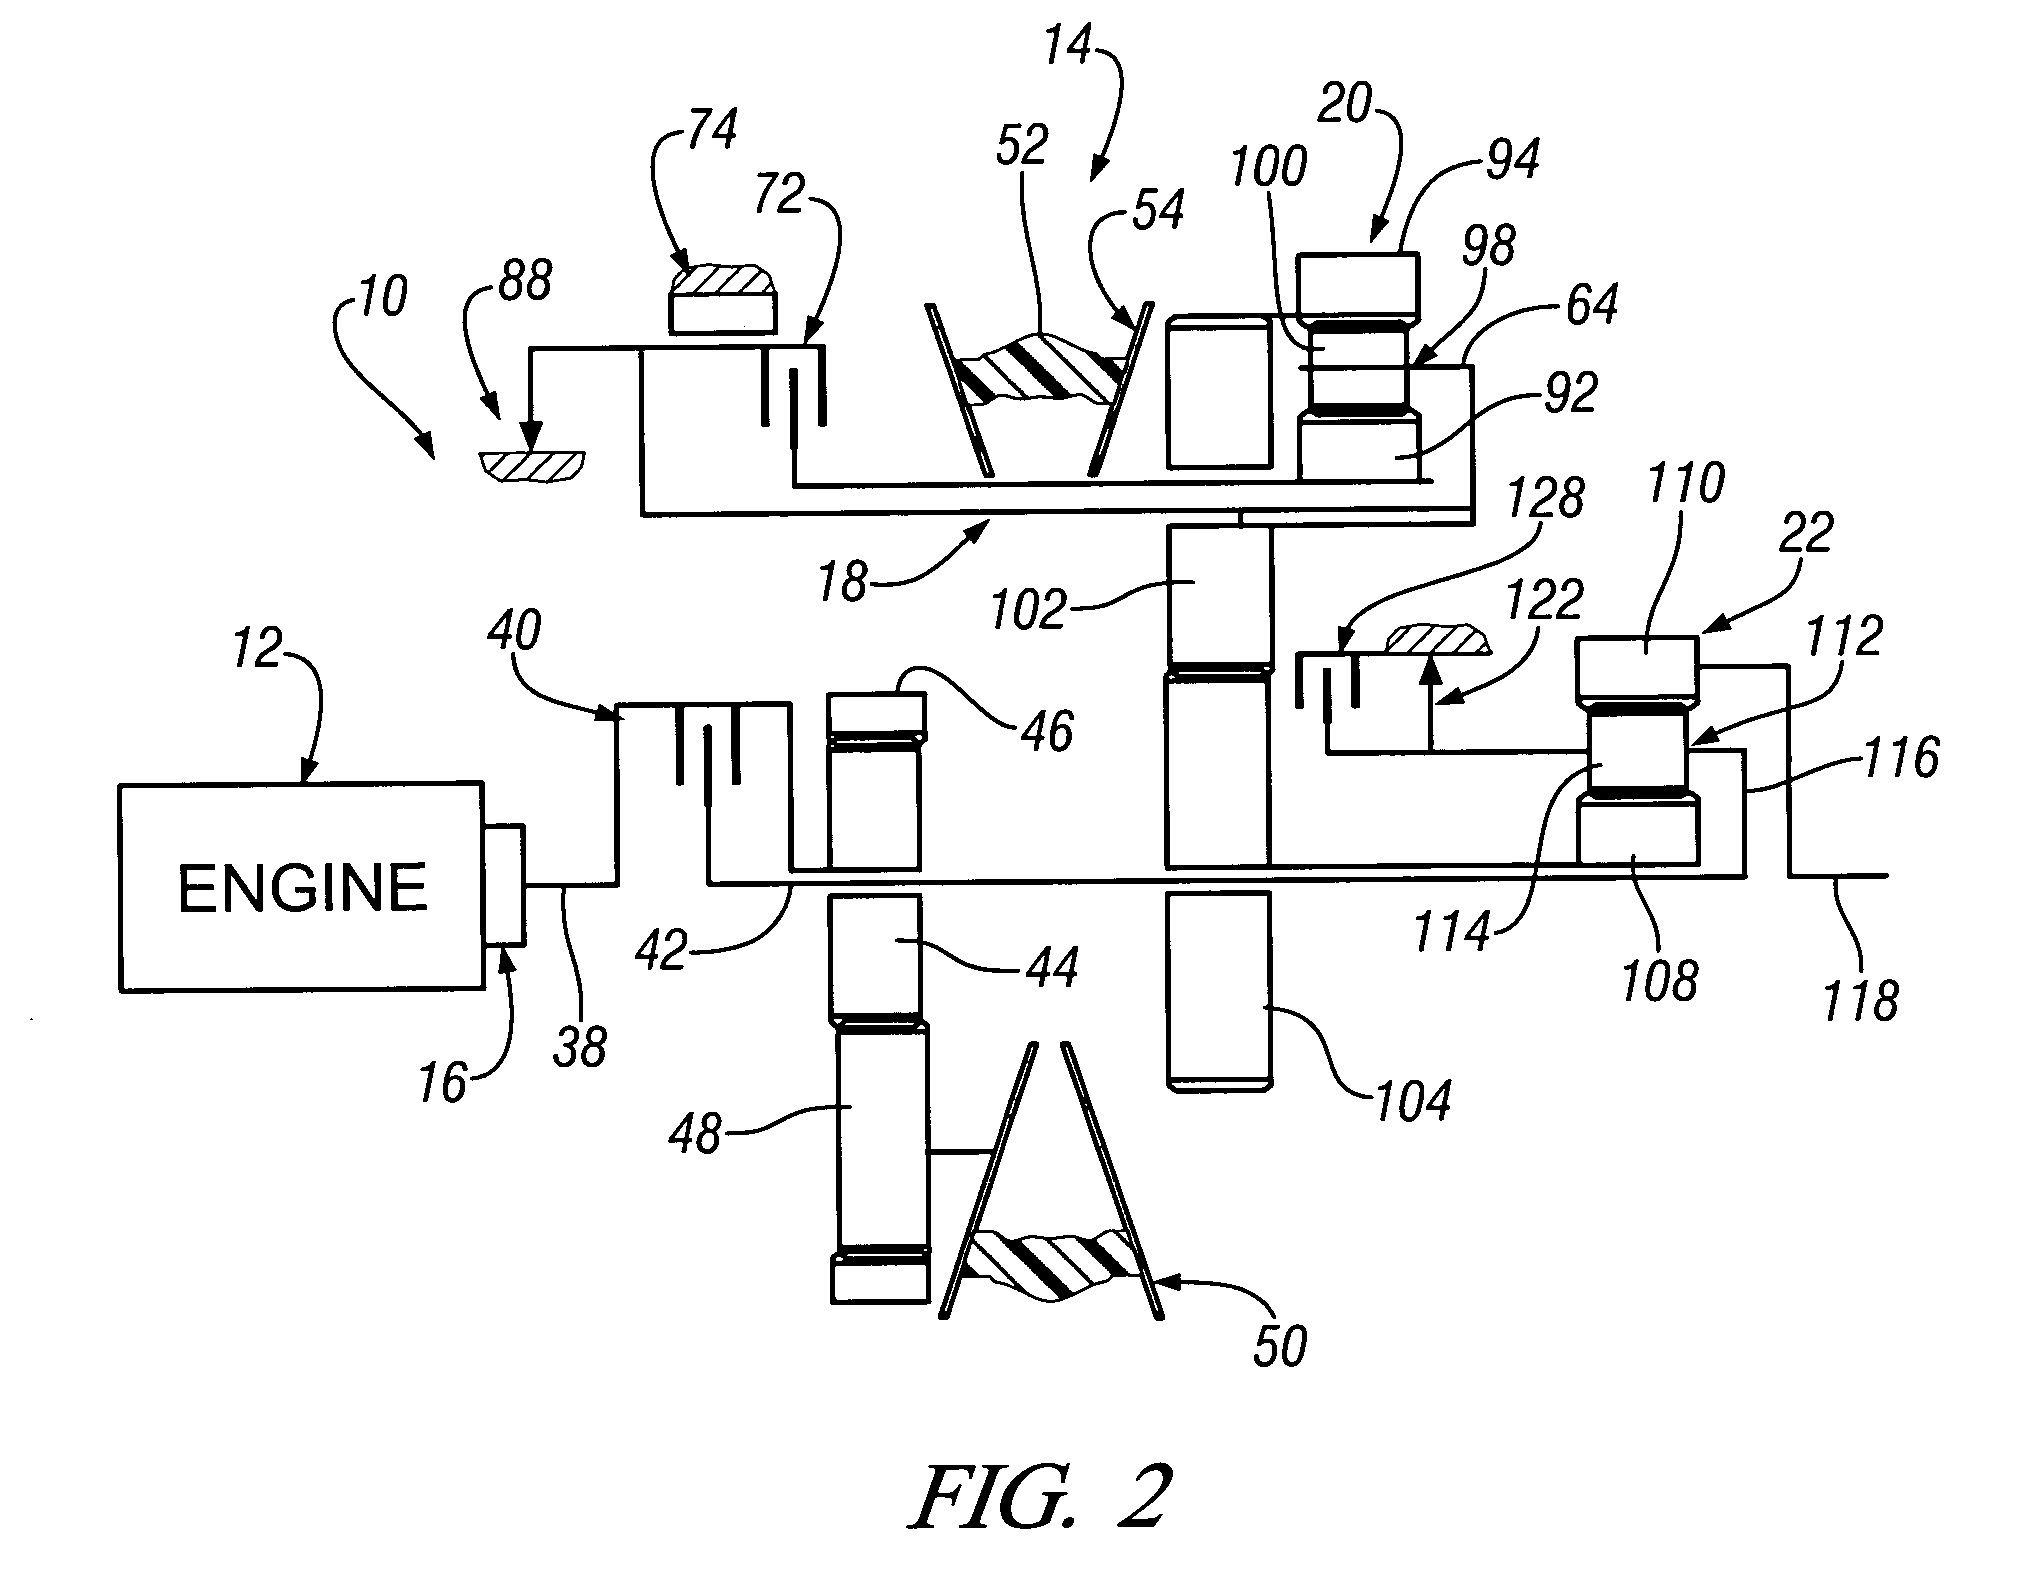 Three-mode continuously variable transmission with a direct low mode and two split path high modes